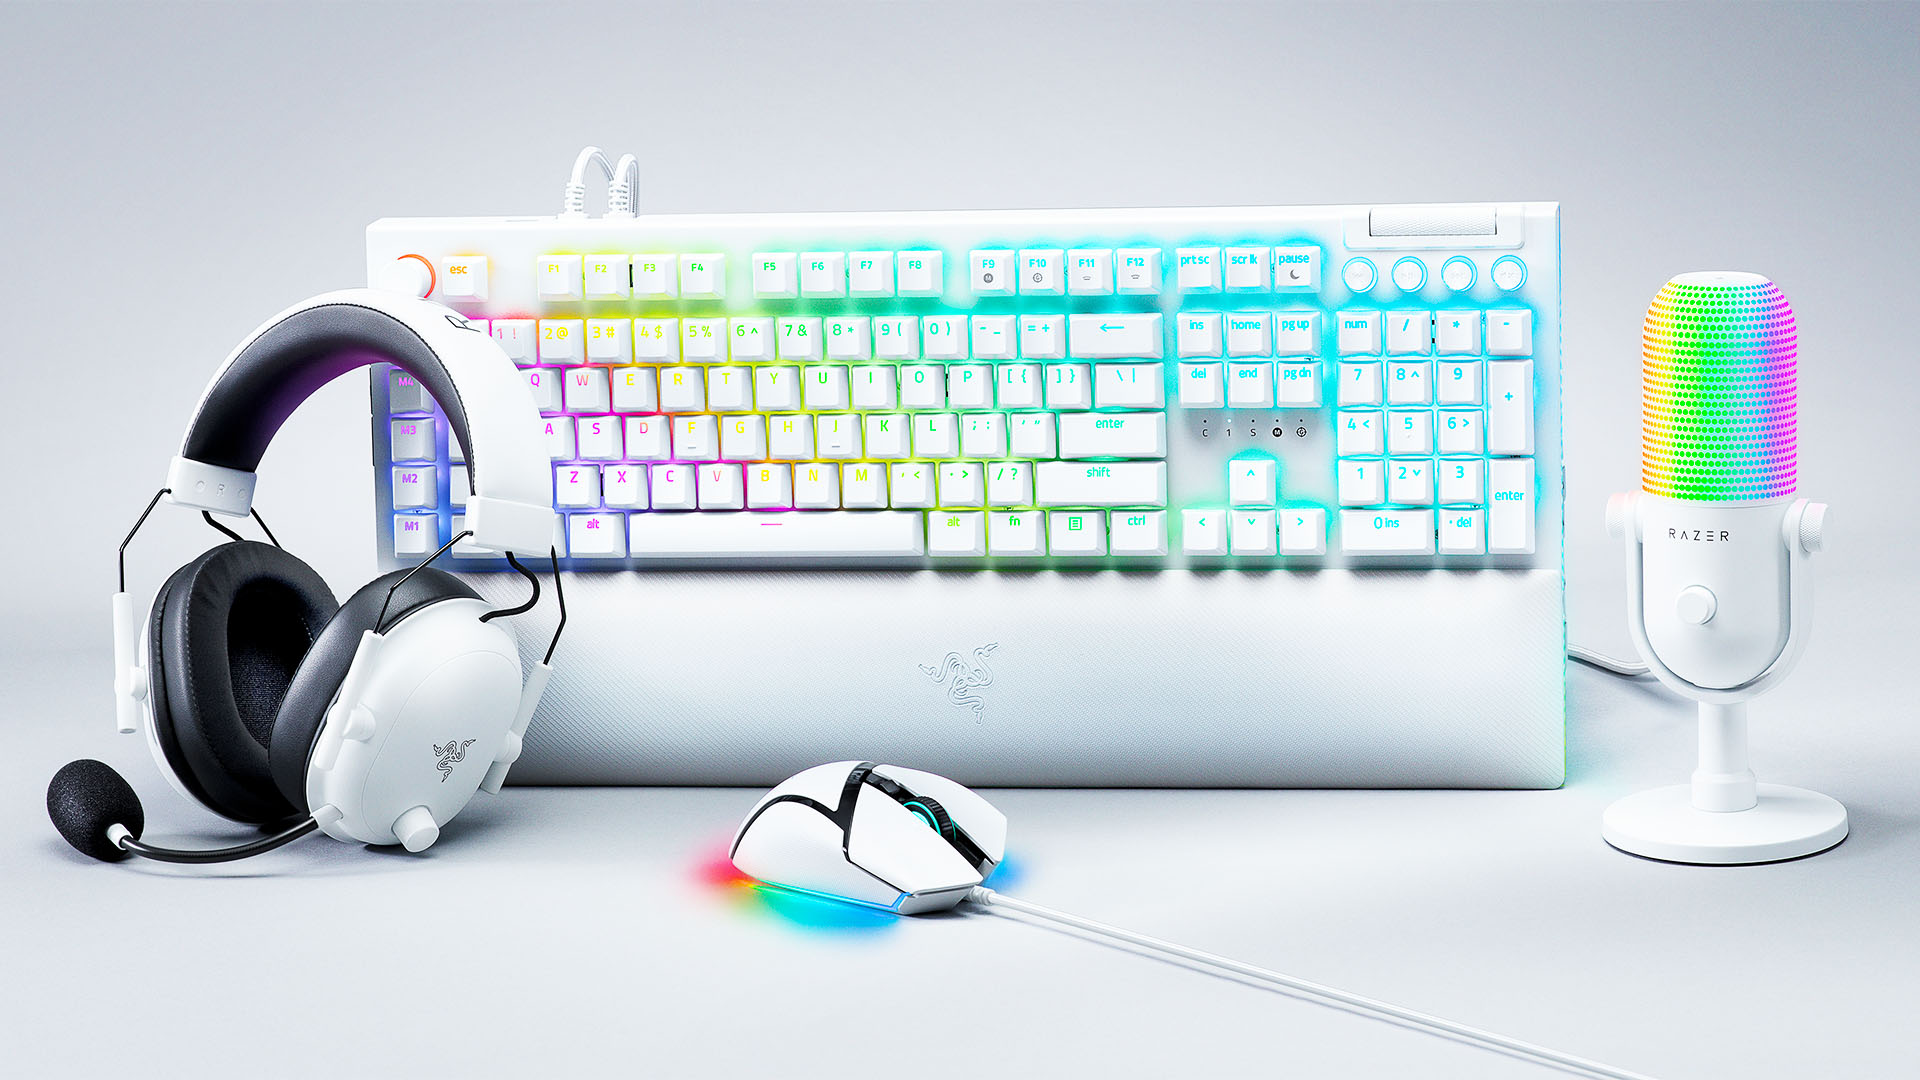 Make your white PC gaming setup dazzle with this new Razer gear